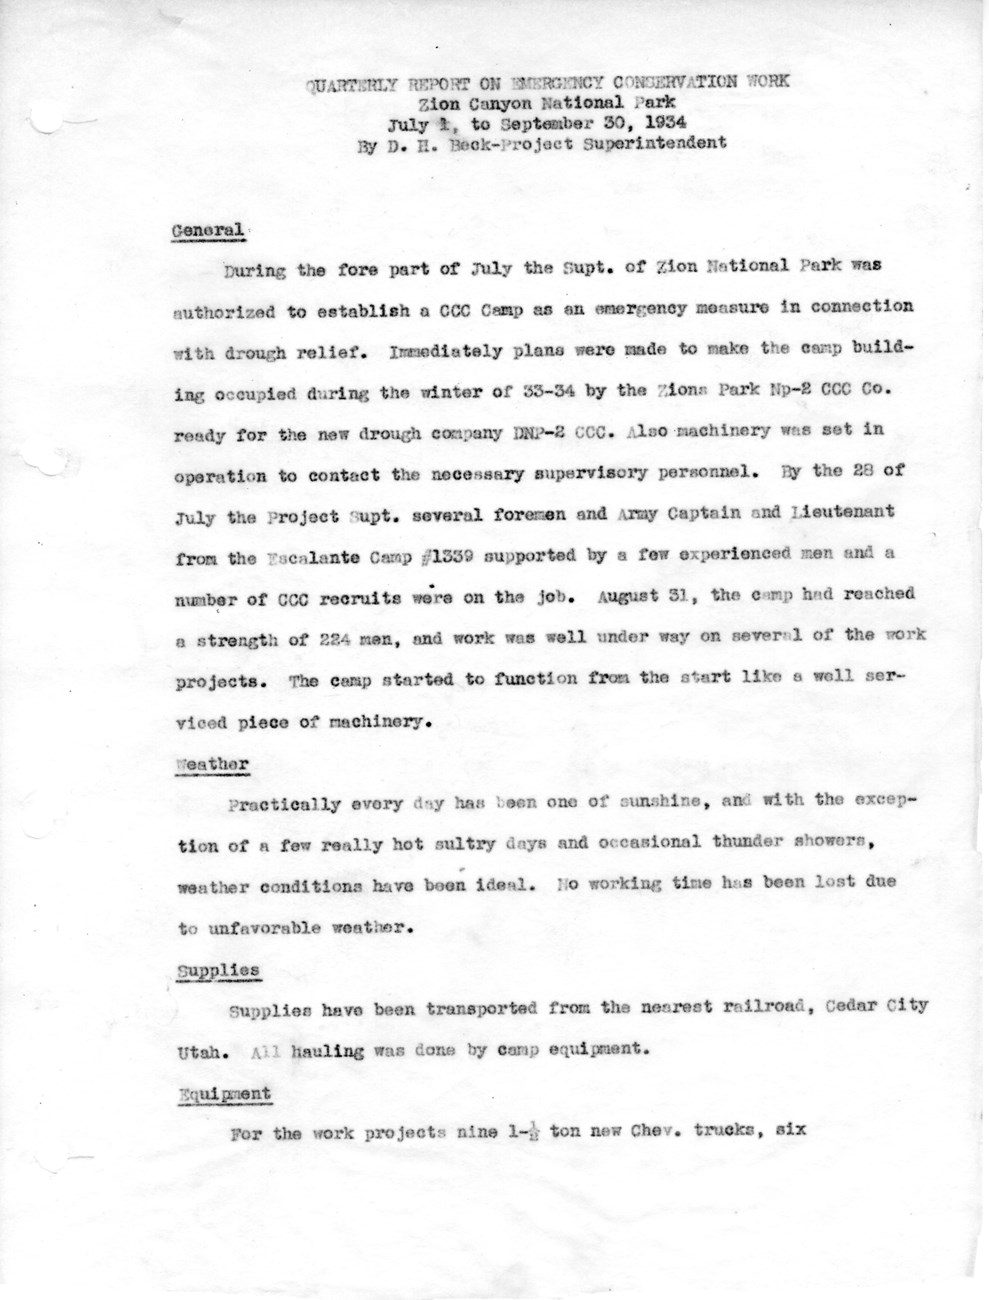 1934 Report includes information about the establishment of Camp NP-2